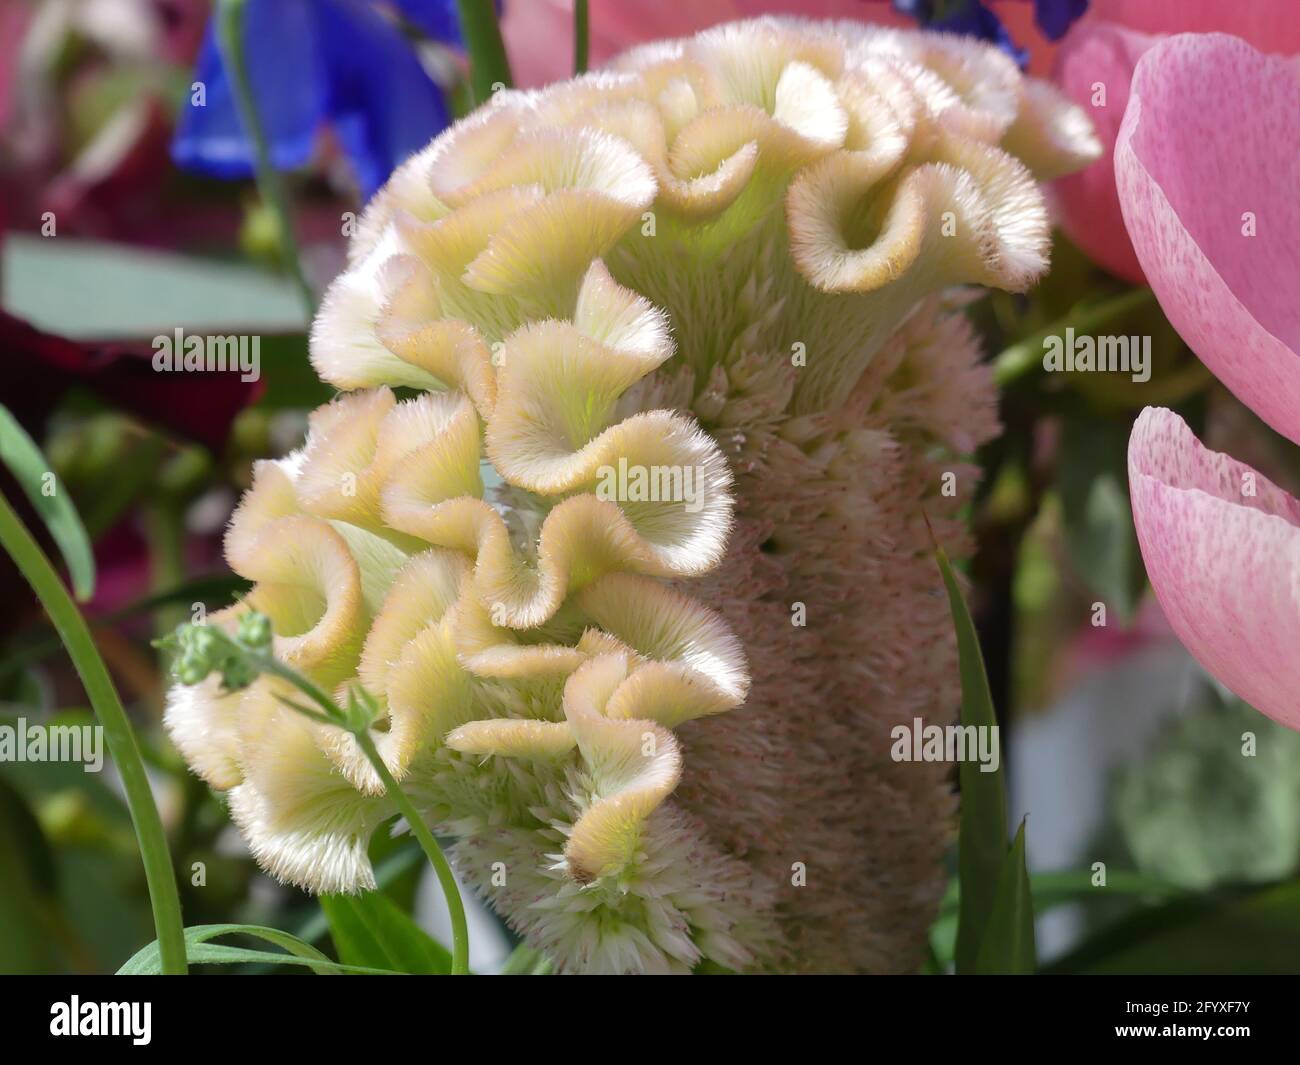 A closeup of a celosia plant with crested flower heads Stock Photo